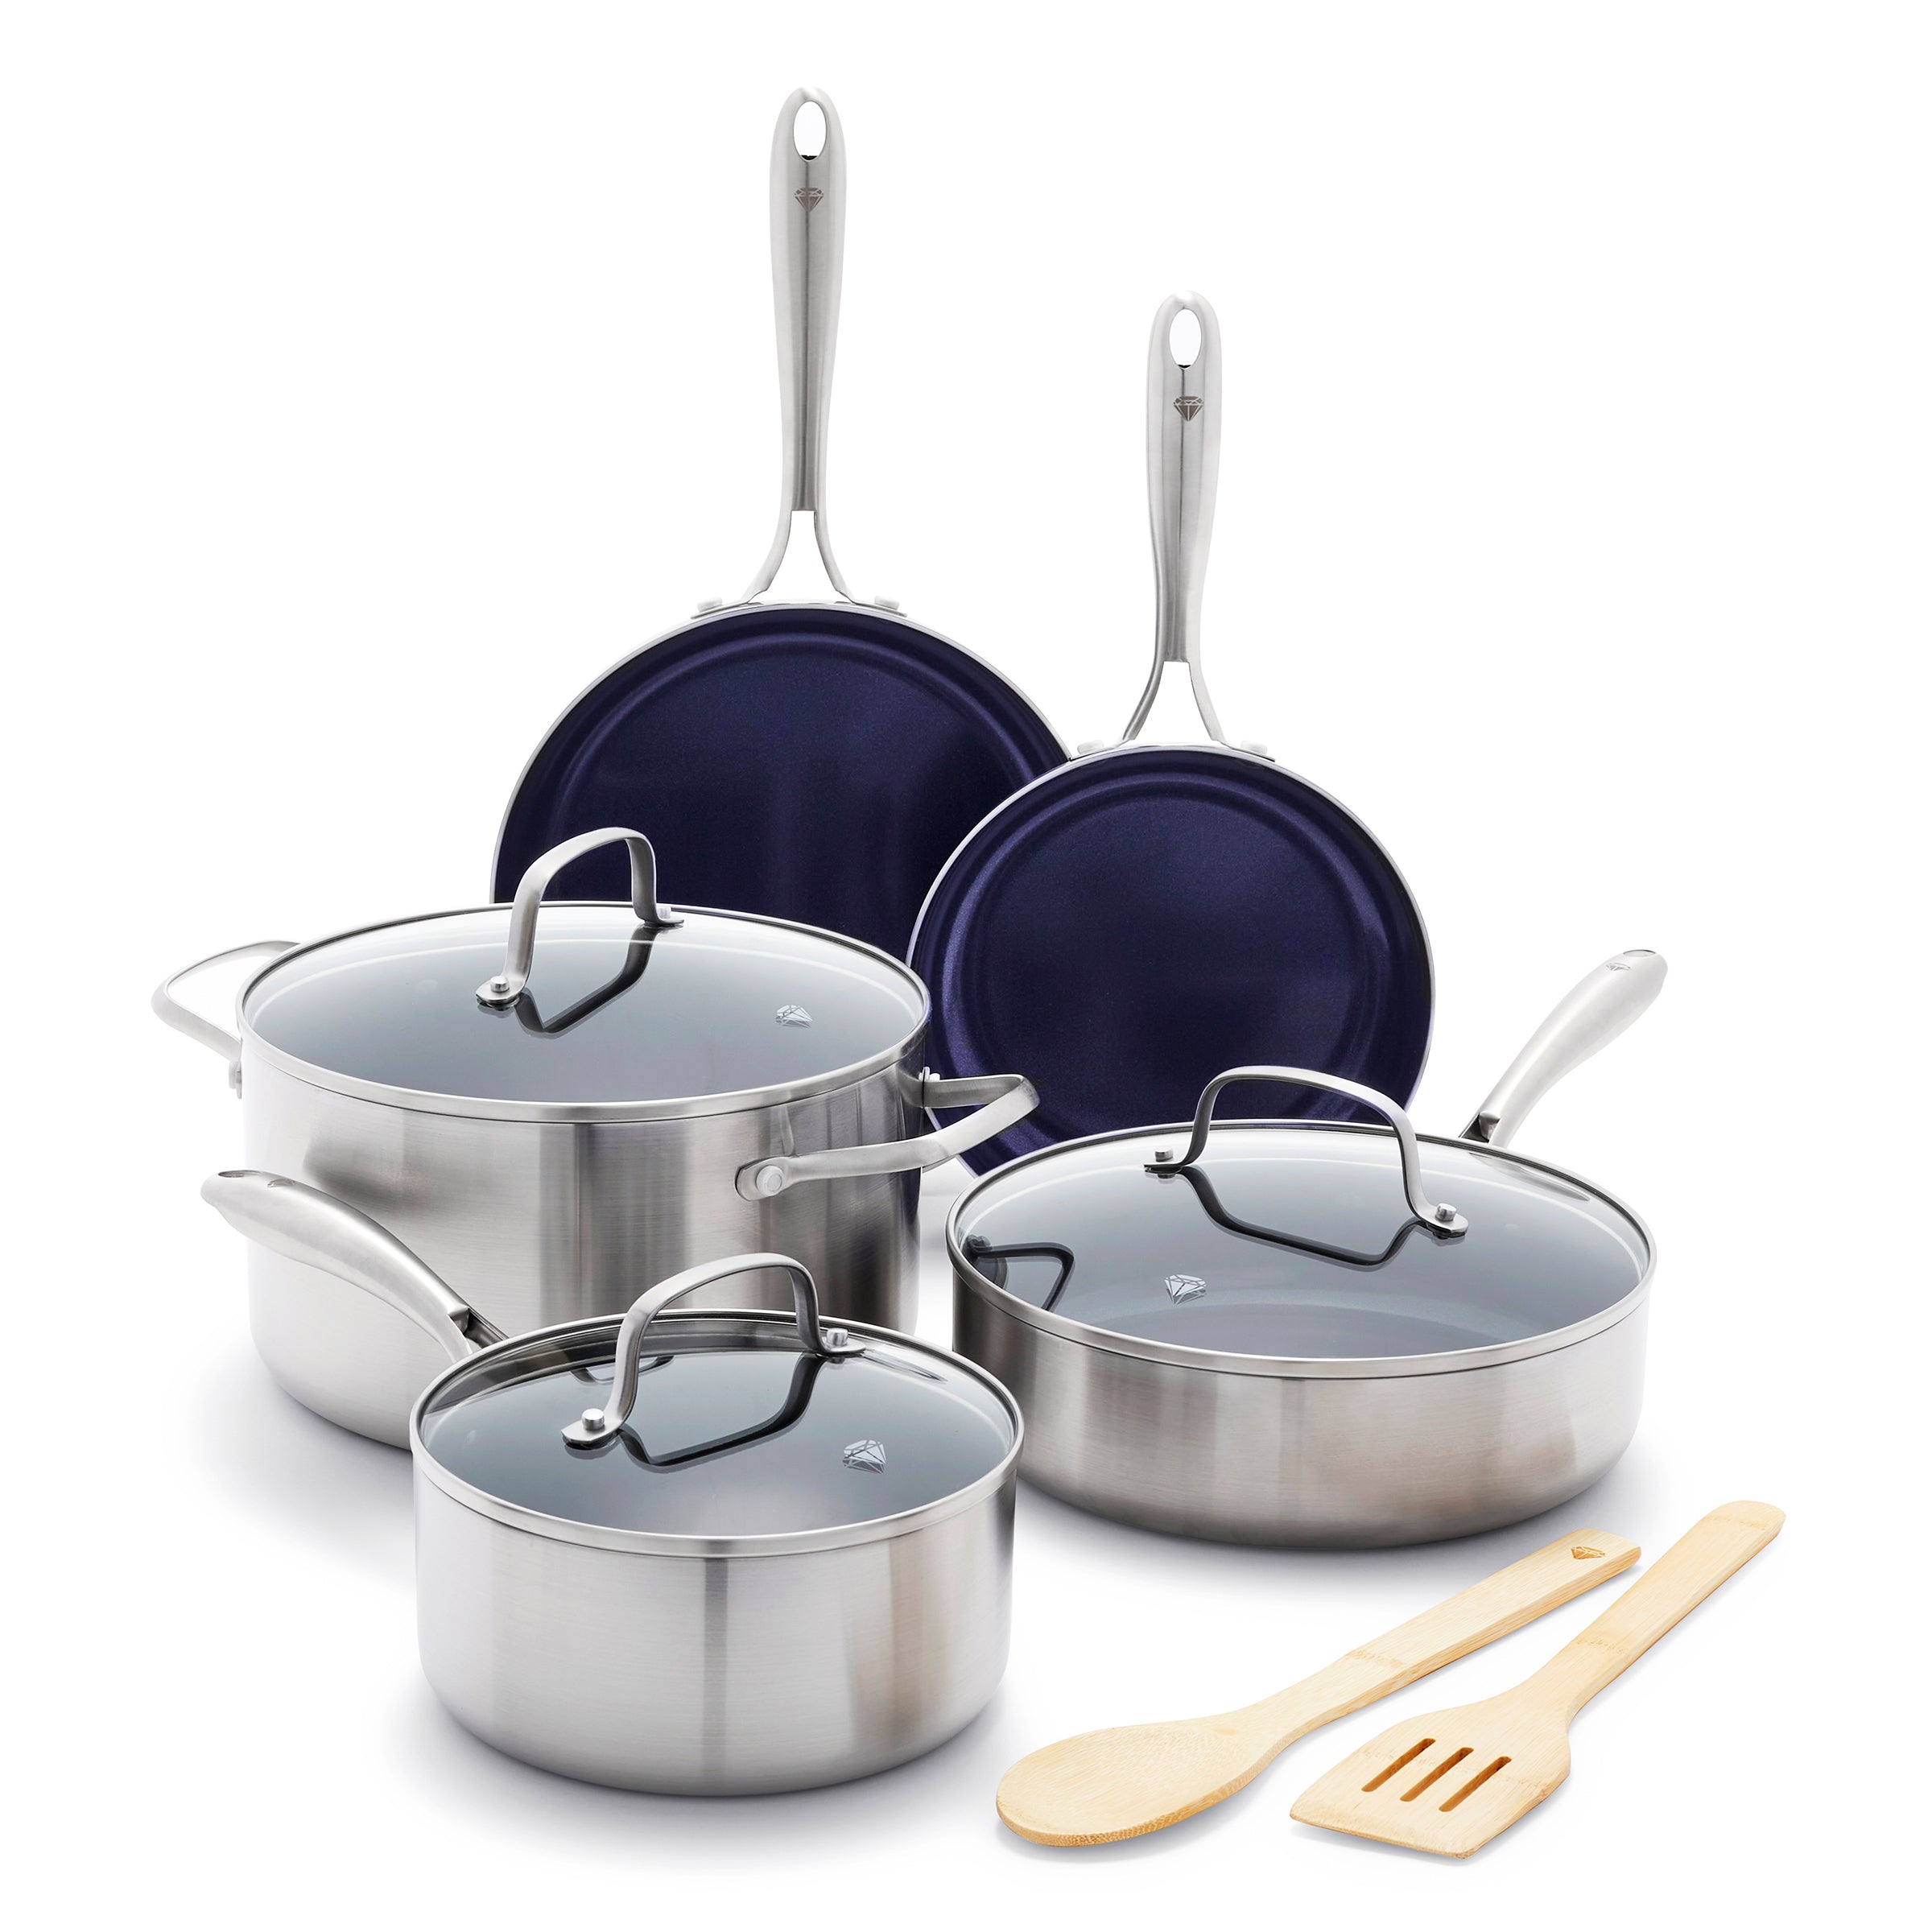 Professional Clad Stainless Steel Ultimate Set, 10-piece